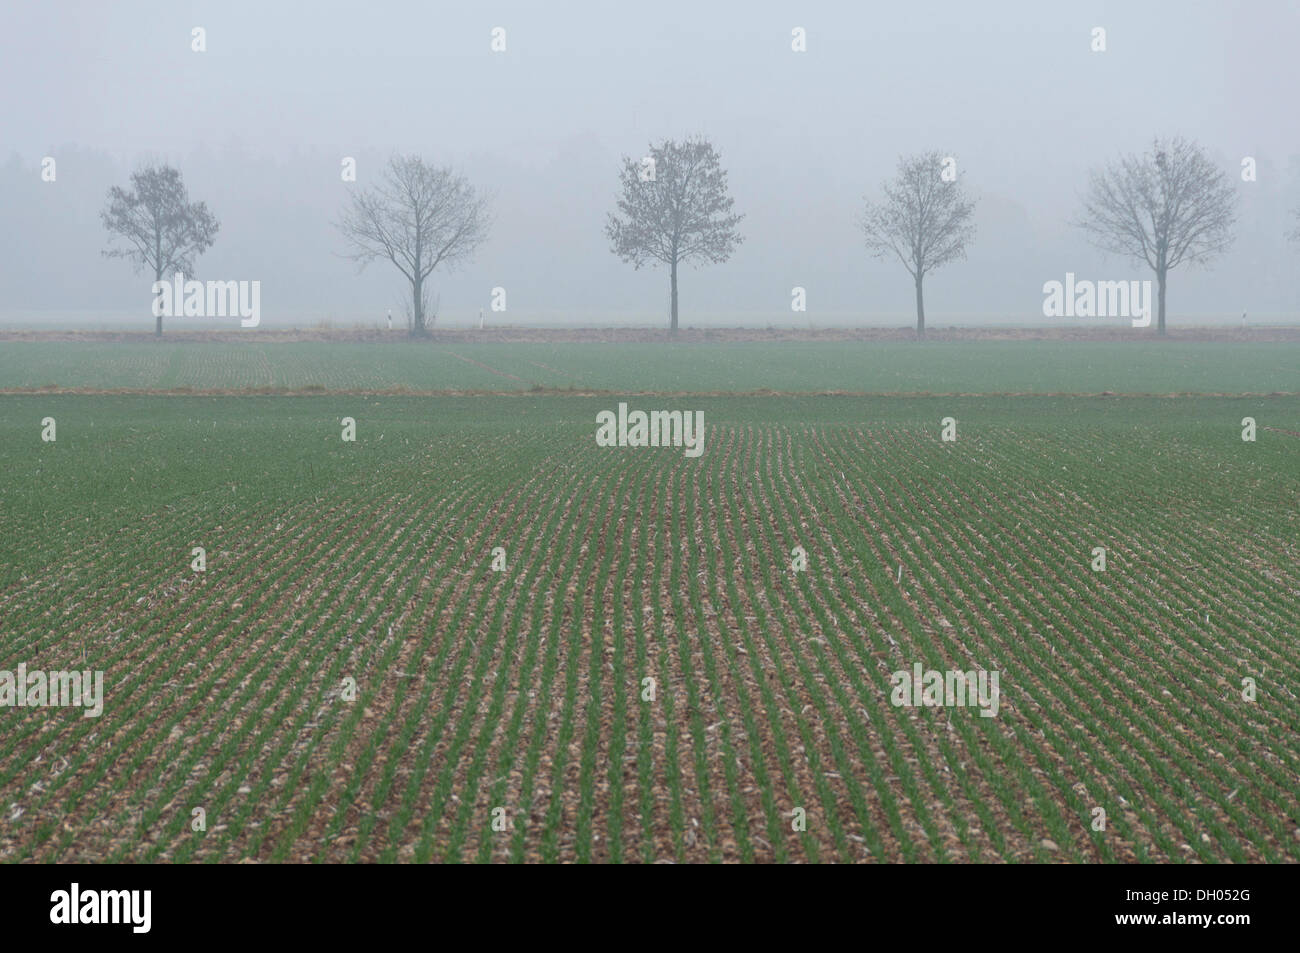 Tree-lined avenue and a field in foggy conditions, near Parsdorf, Upper Bavaria, Bavaria Stock Photo